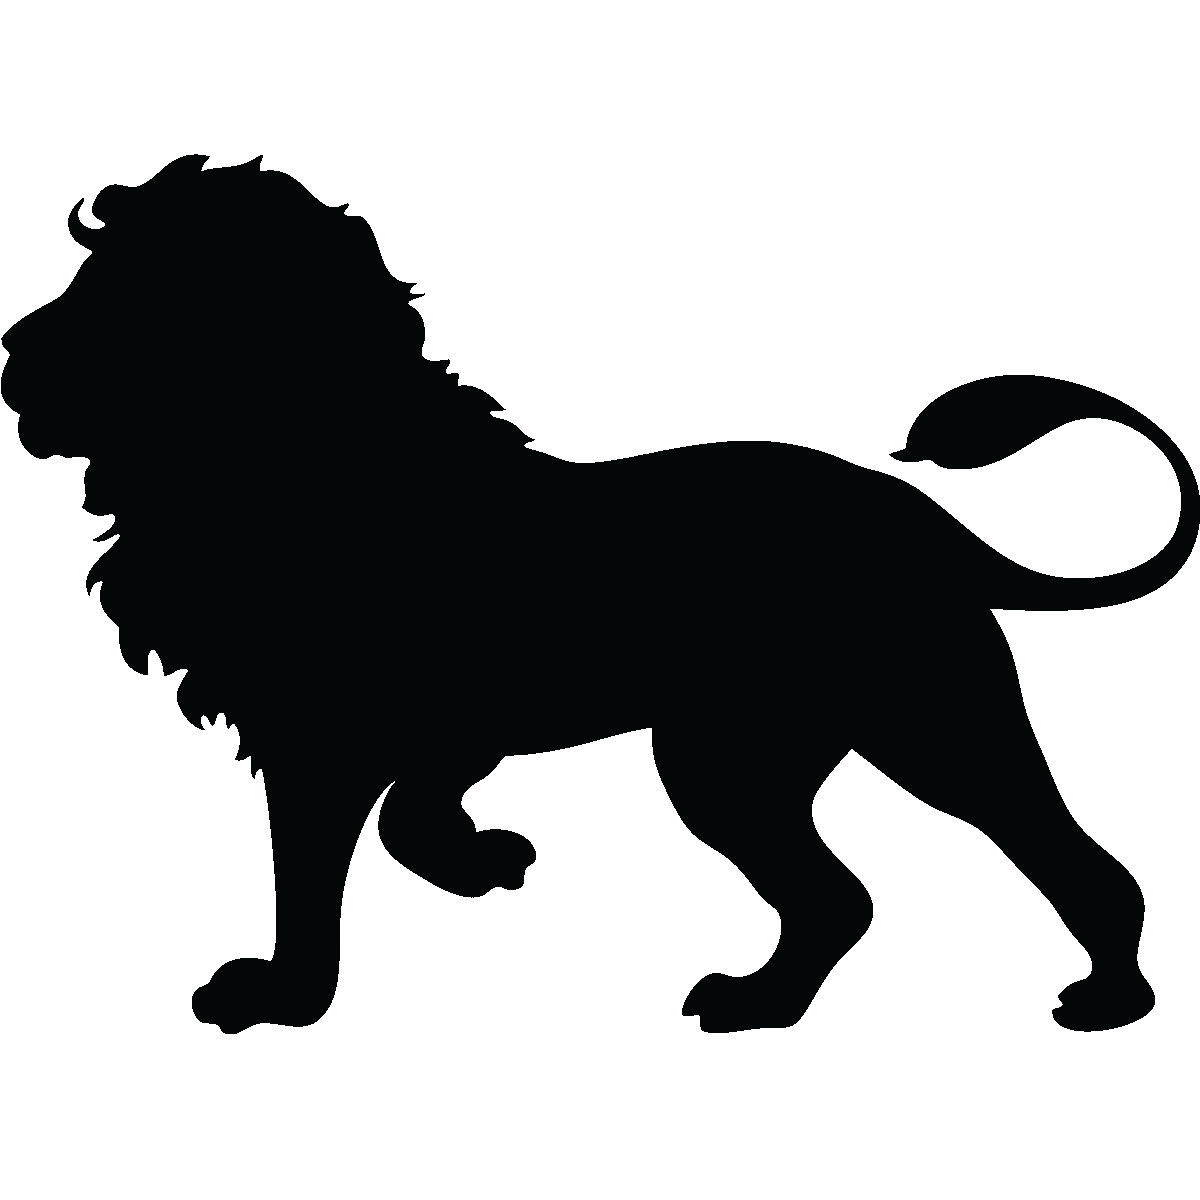 Lion Silhouette Clip art - animal silhouettes png download - 1200*1200 ...